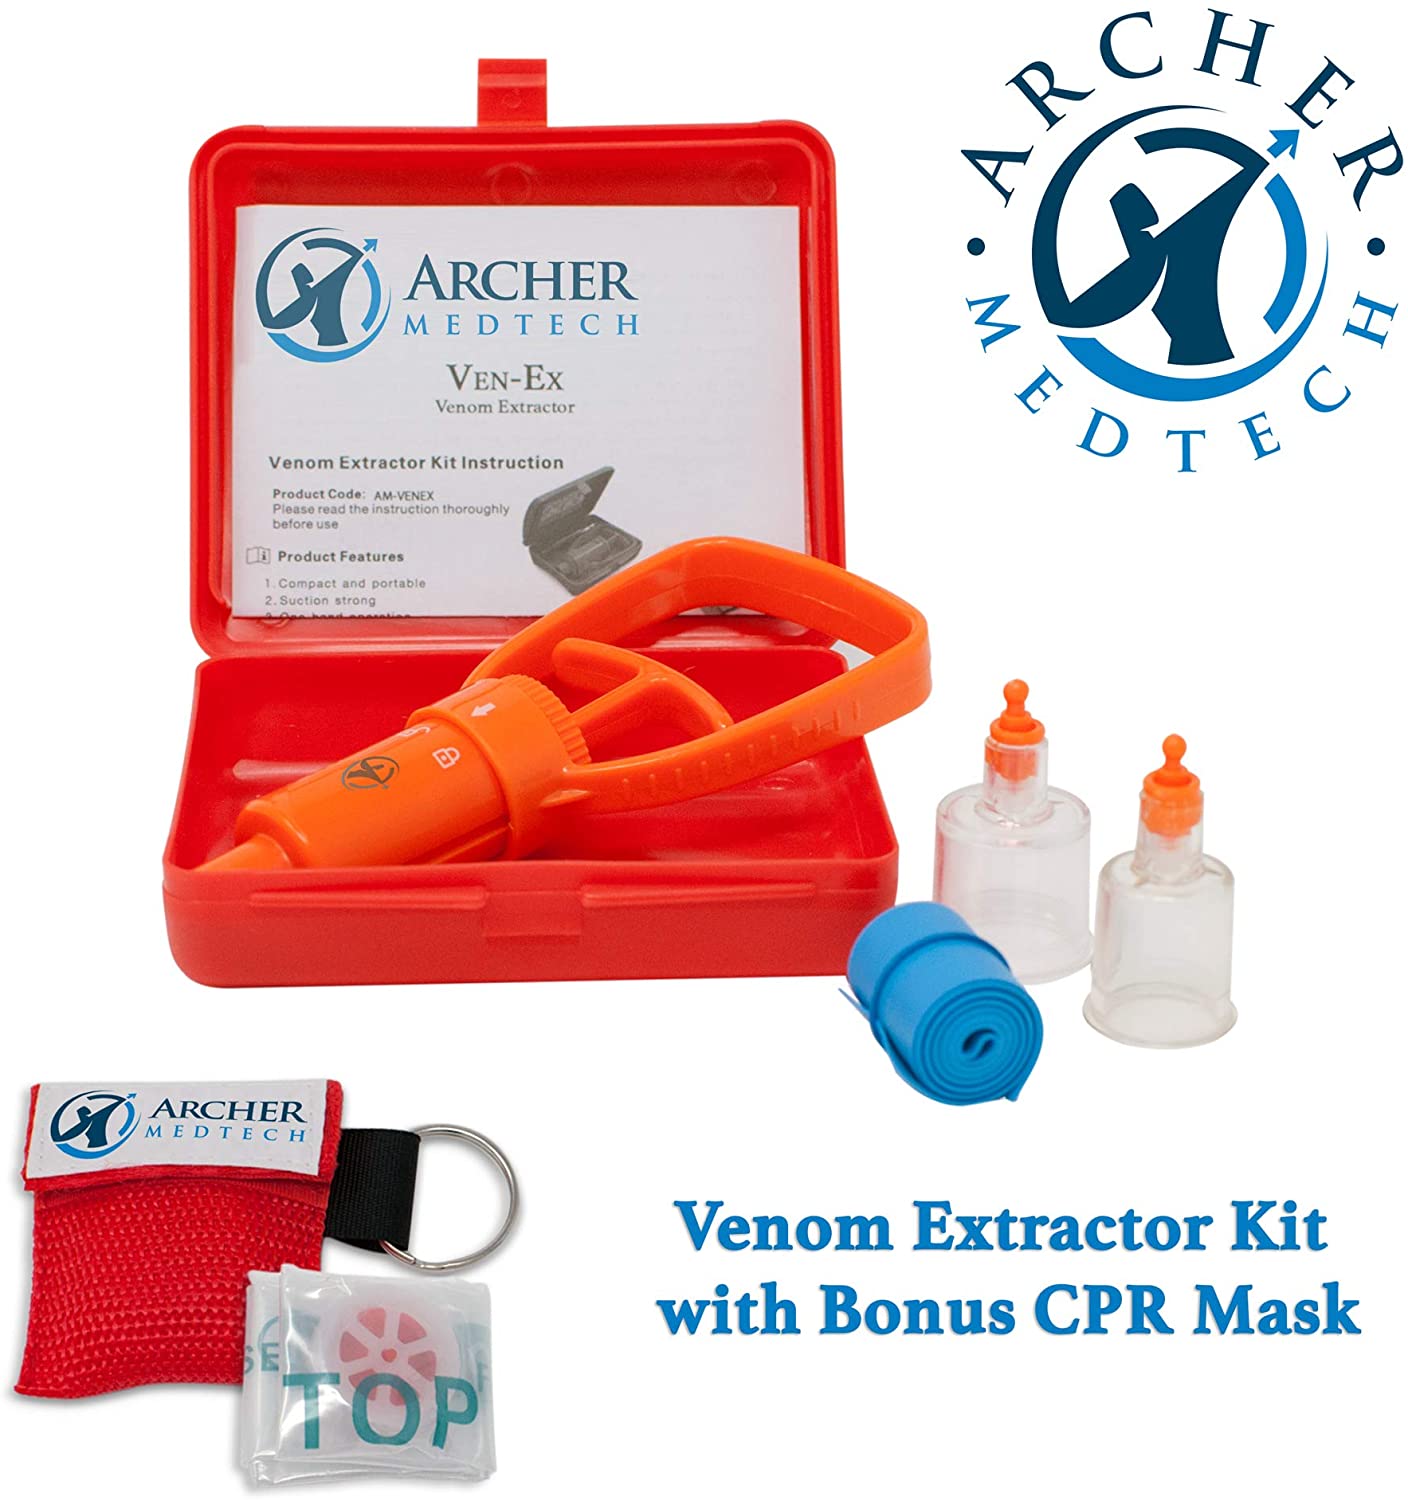 Ven-Ex Snake Bite Kit, Bee Sting Kit, Emergency First Aid Supplies, Venom Extractor Suction Pump, Bite and Sting First Aid for Hiking, Backpacking and Camping. Includes Bonus CPR face Shield. Roll over image to zoom in Ven-Ex Snake Bite Kit